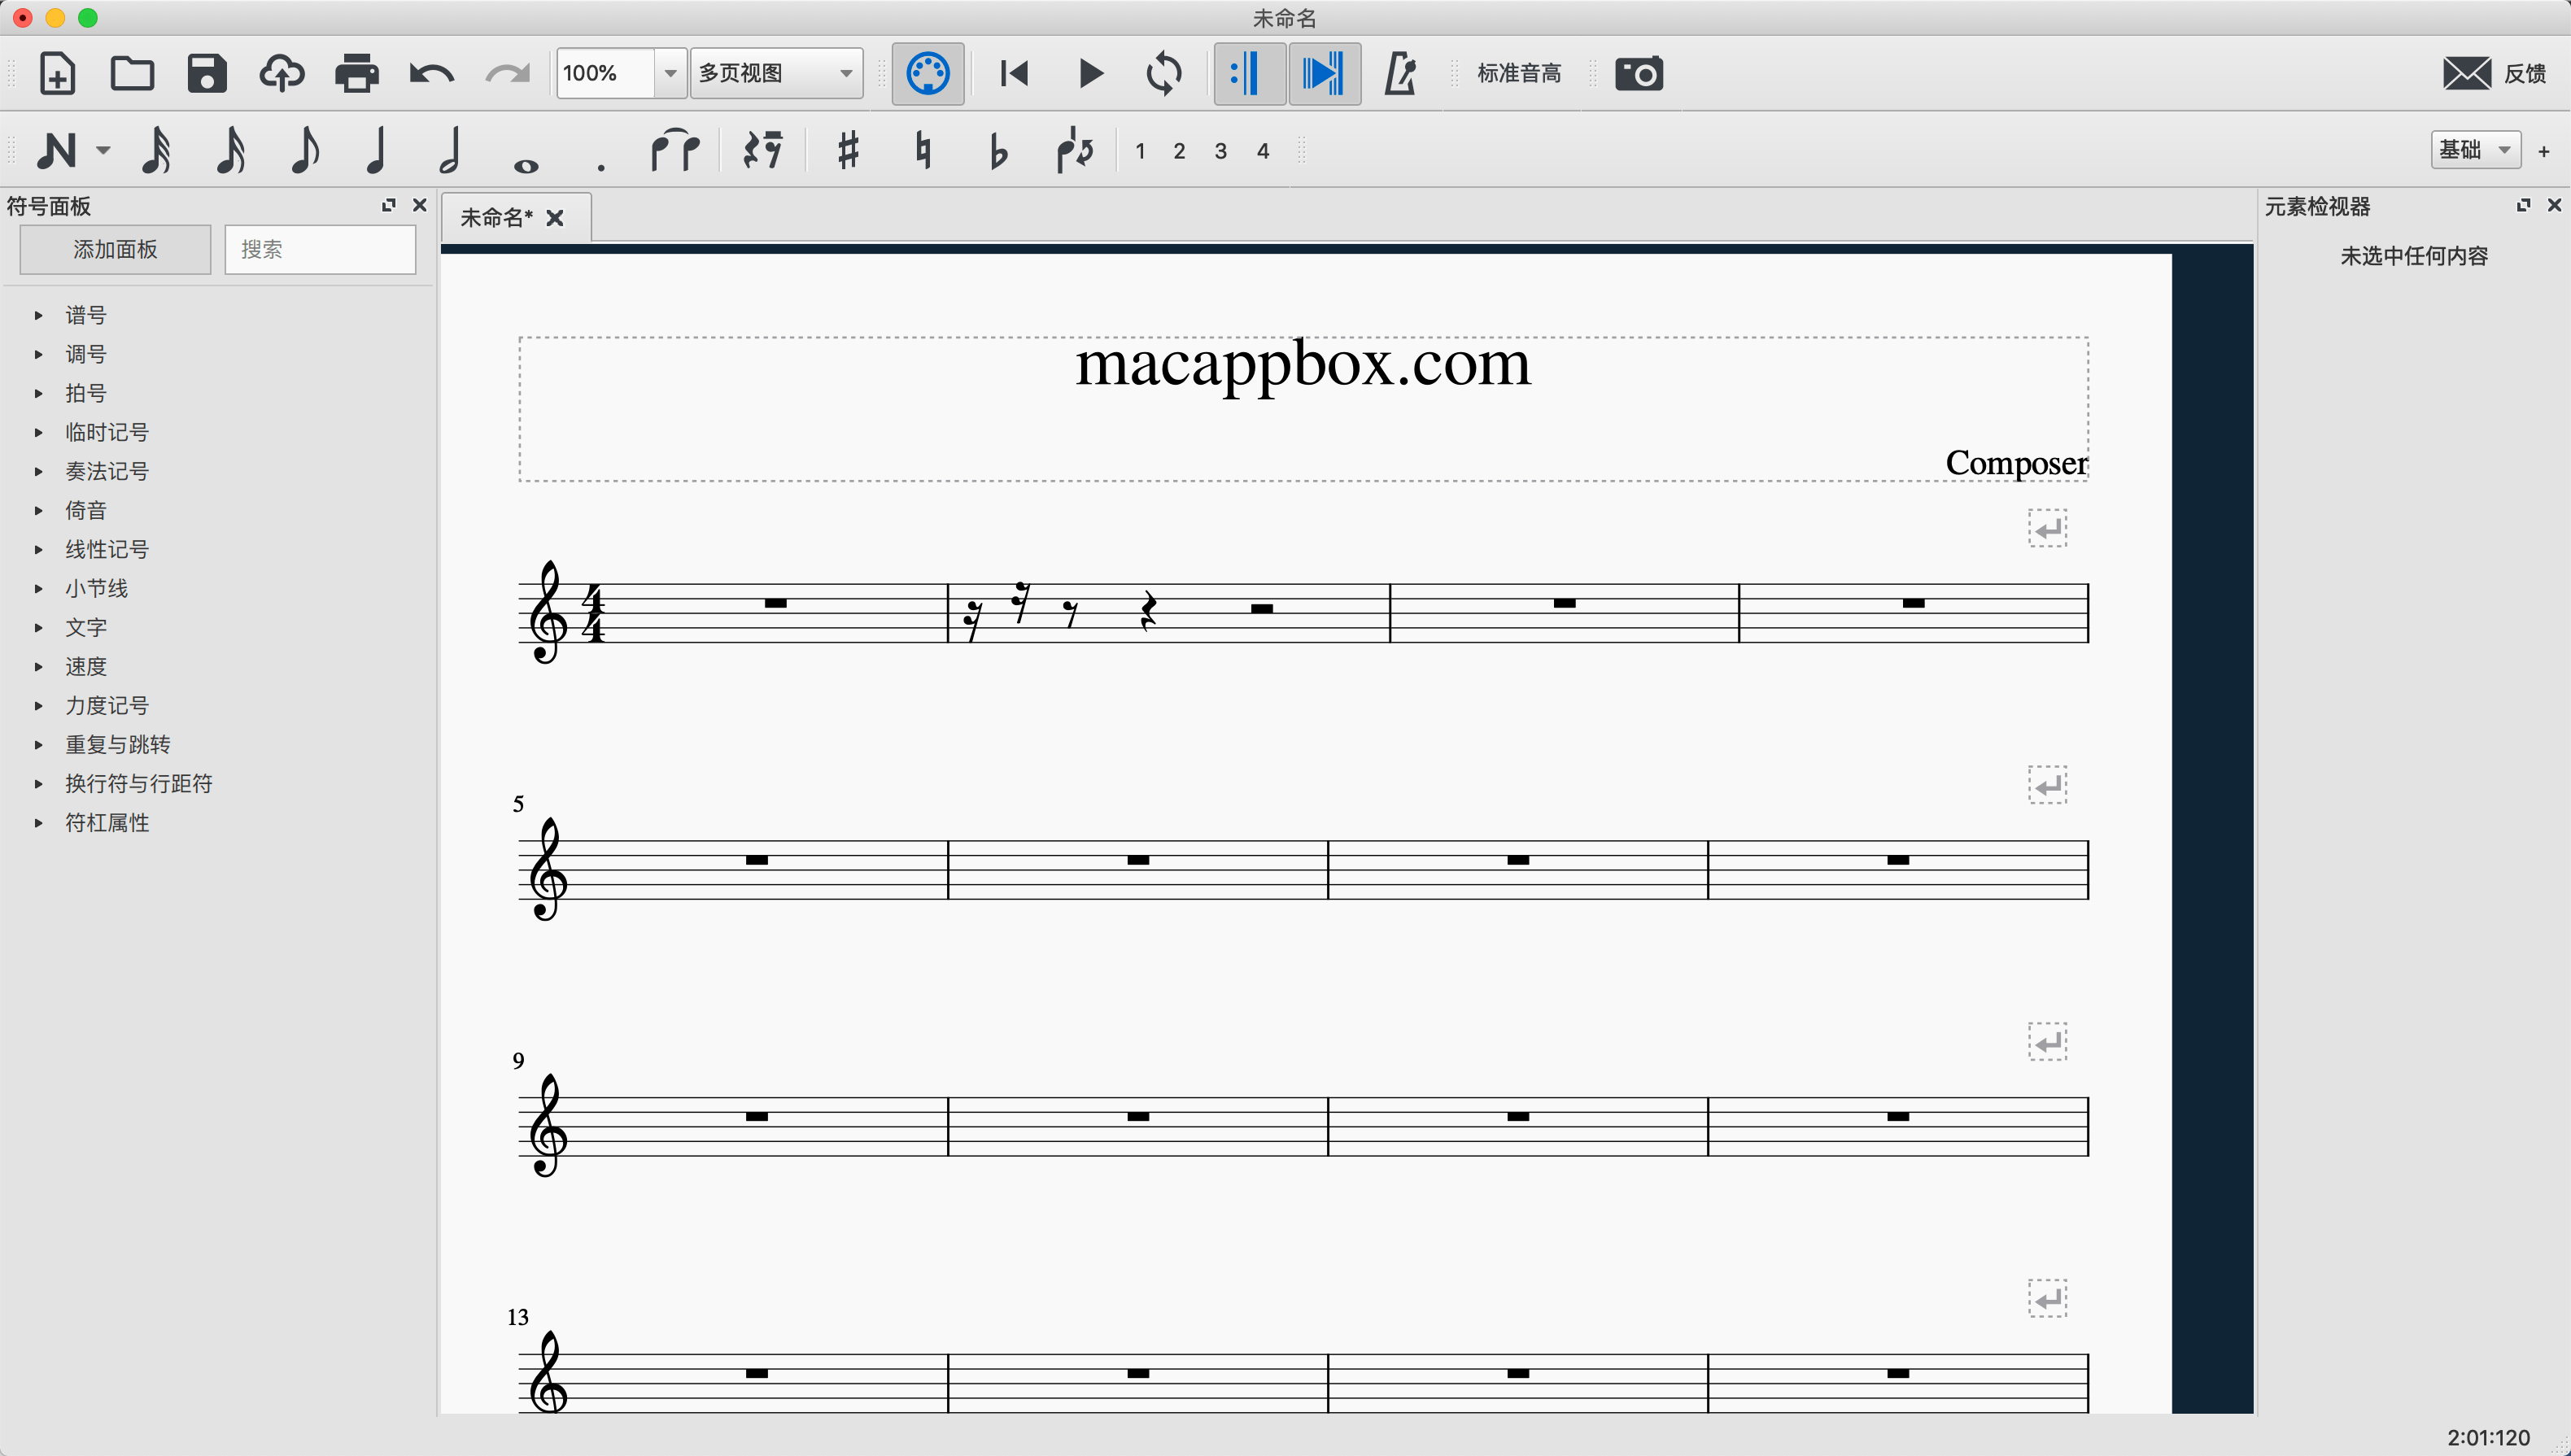 instal the new version for apple MuseScore 4.1.1